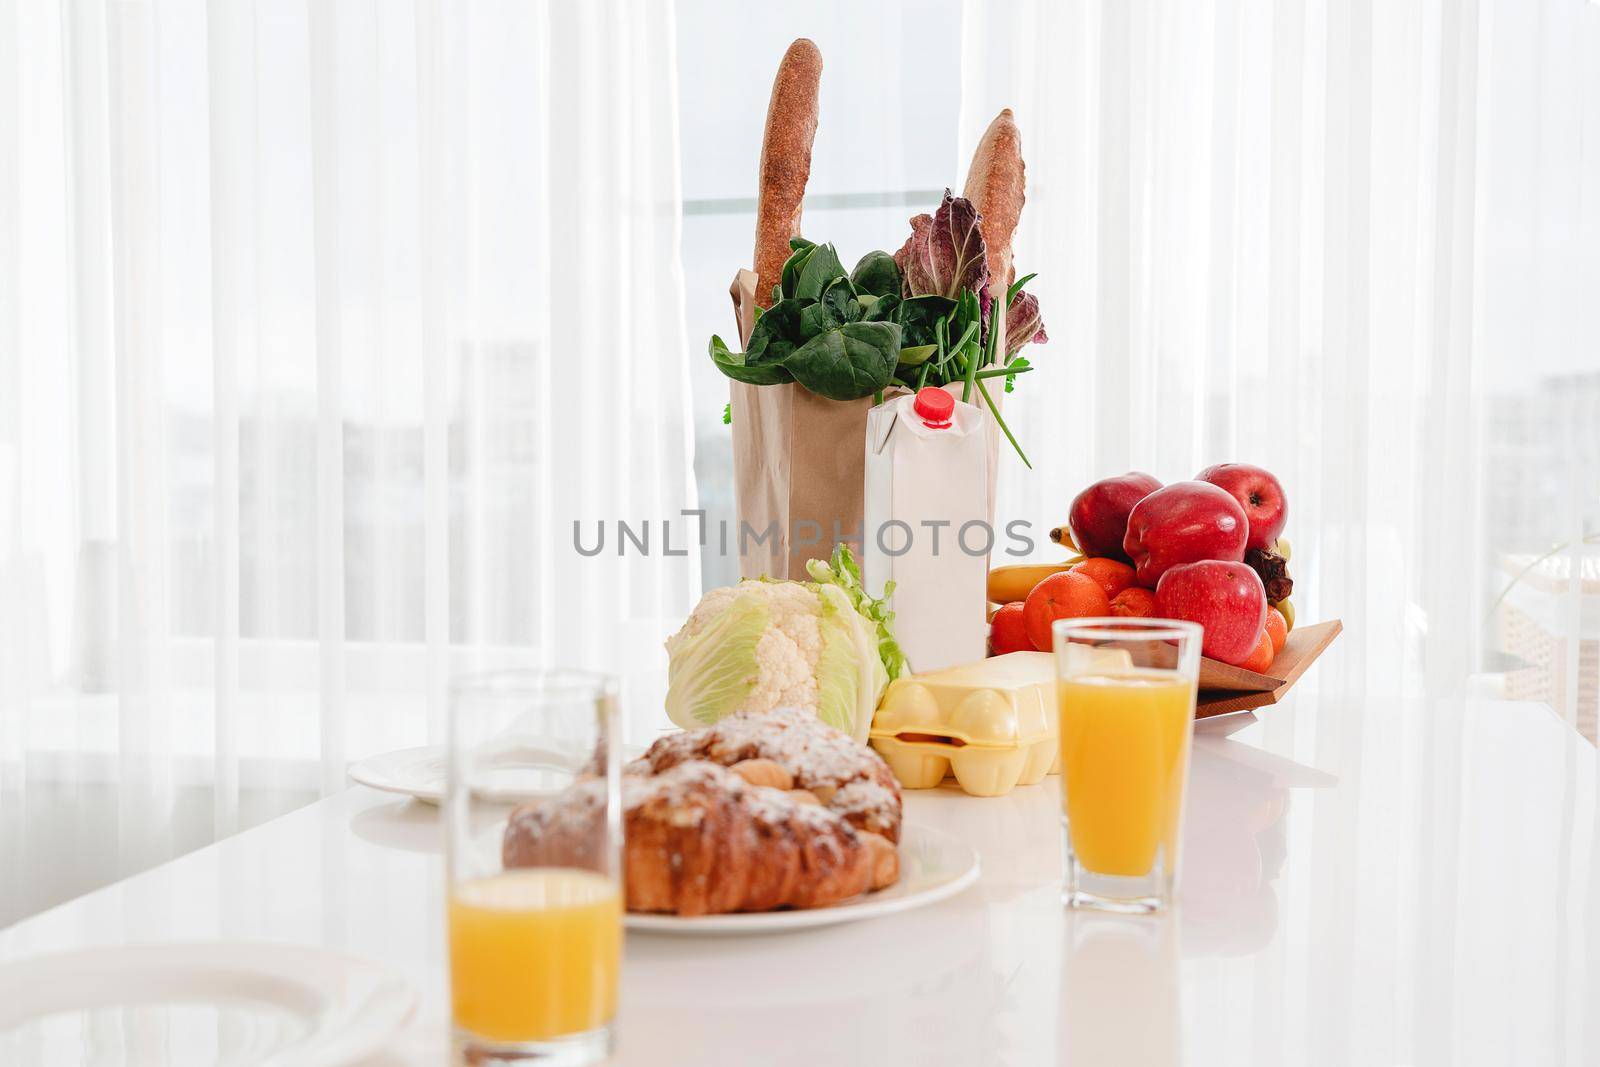 A plate of food on a table next to a window, morning breakfast concept by Mariakray